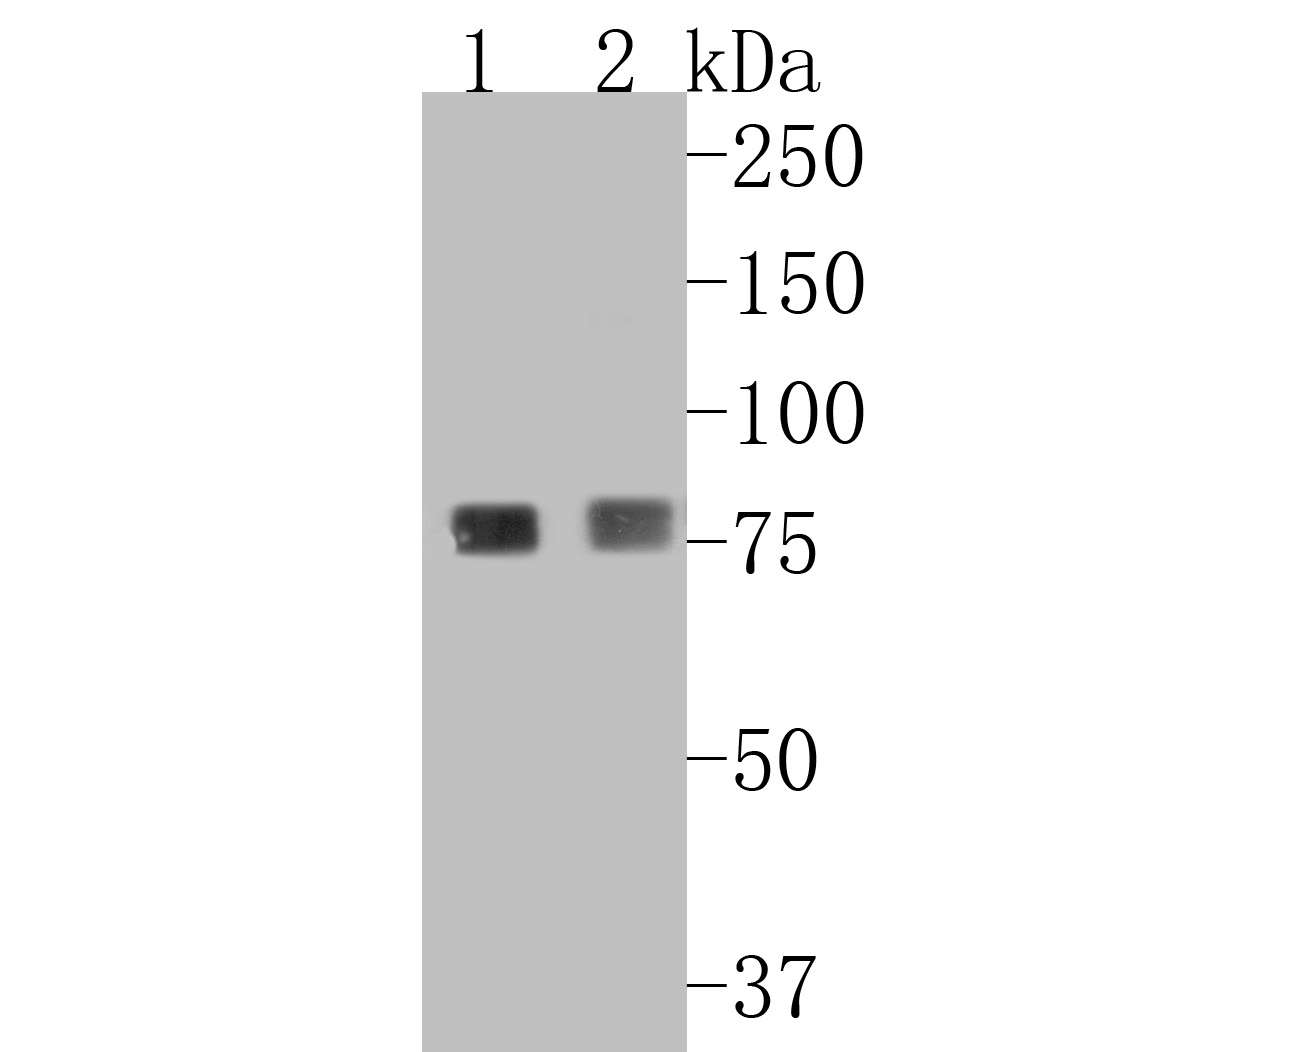 Western blot analysis of Beta glucuronidase on different lysates. Proteins were transferred to a PVDF membrane and blocked with 5% BSA in PBS for 1 hour at room temperature. The primary antibody (ET7110-66, 1/500) was used in 5% BSA at room temperature for 2 hours. Goat Anti-Rabbit IgG - HRP Secondary Antibody (HA1001) at 1:5,000 dilution was used for 1 hour at room temperature.<br />
Positive control: <br />
Lane 1: U937 cell lysate<br />
Lane 2: Human lung tissue lysate